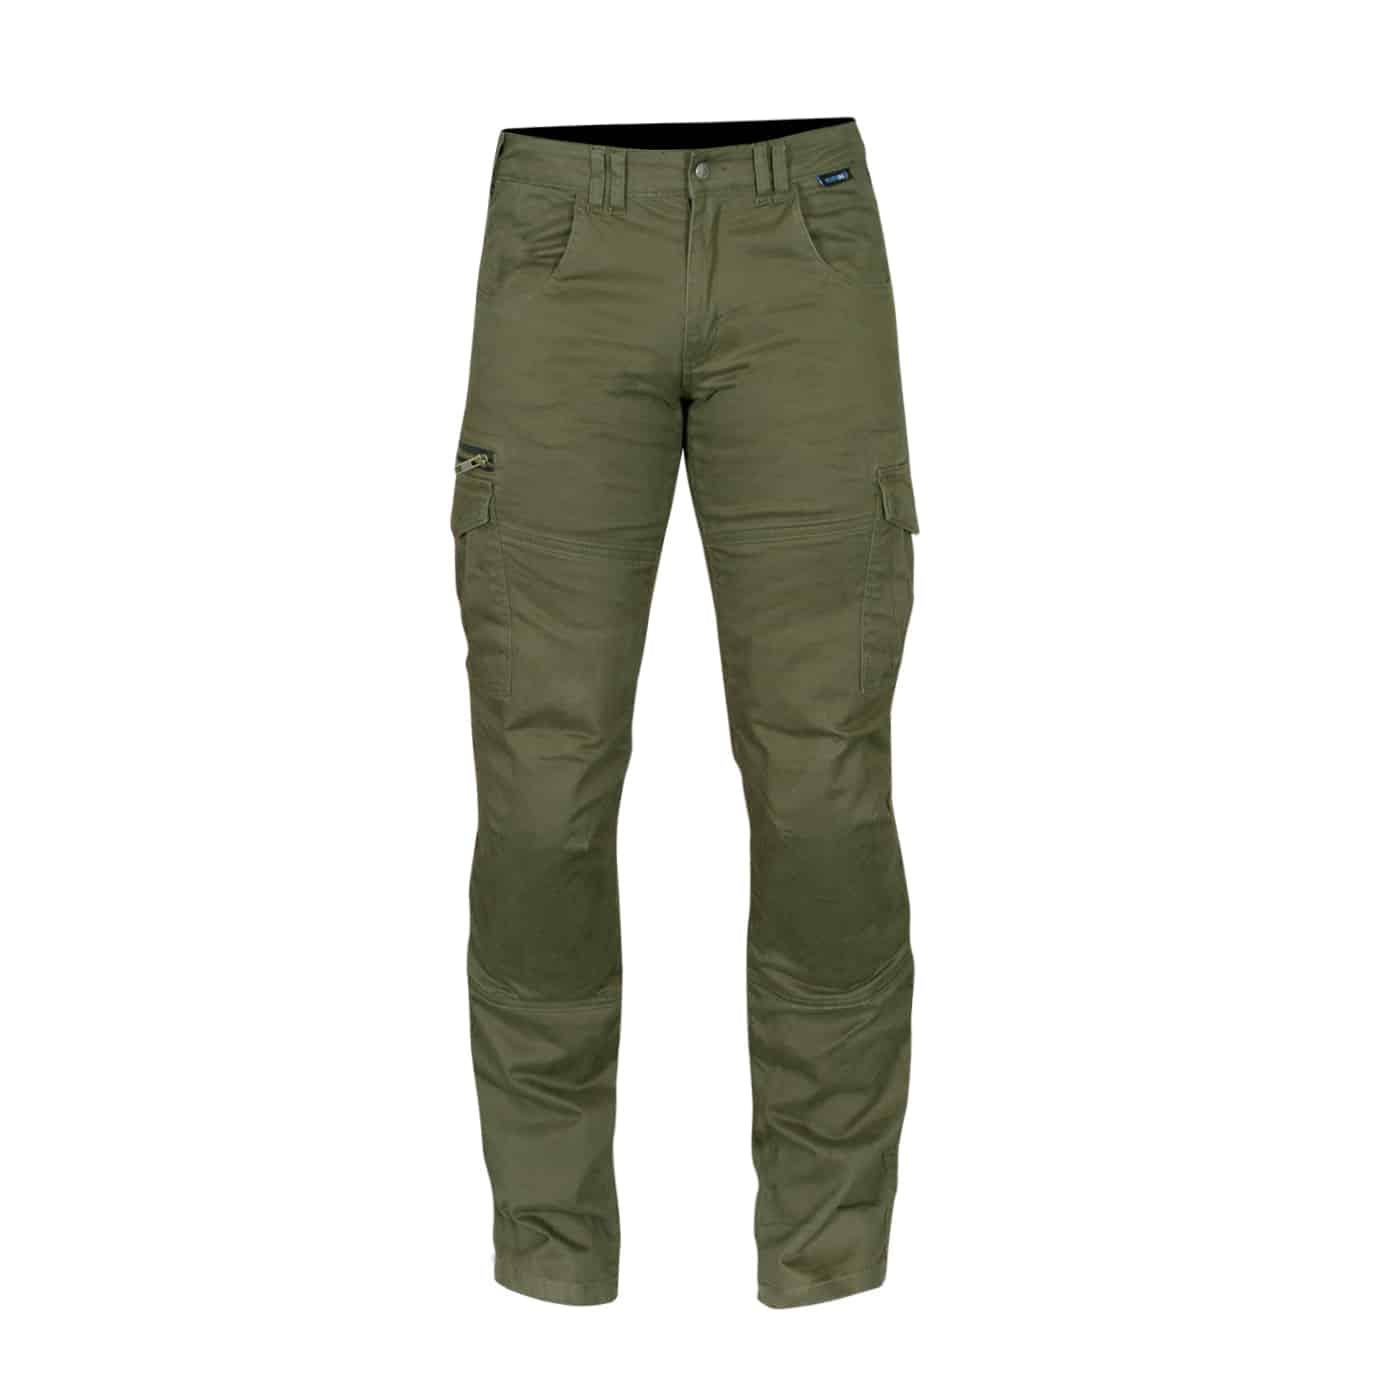 J. Crew seamed motorcycle pant olive green